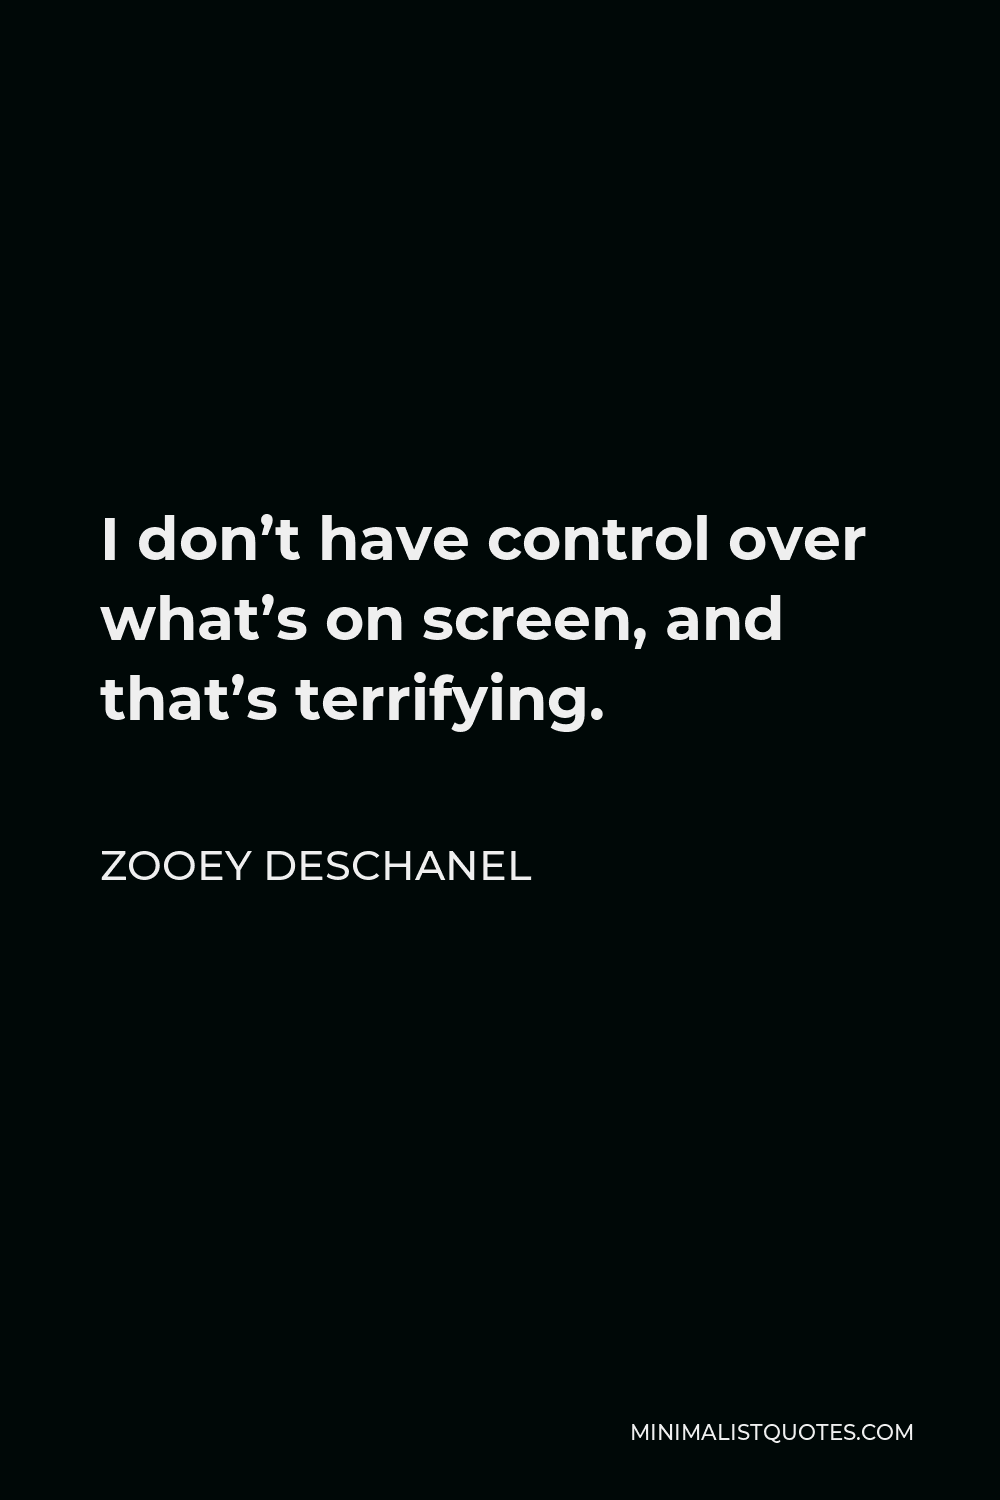 Zooey Deschanel Quote - I don’t have control over what’s on screen, and that’s terrifying.